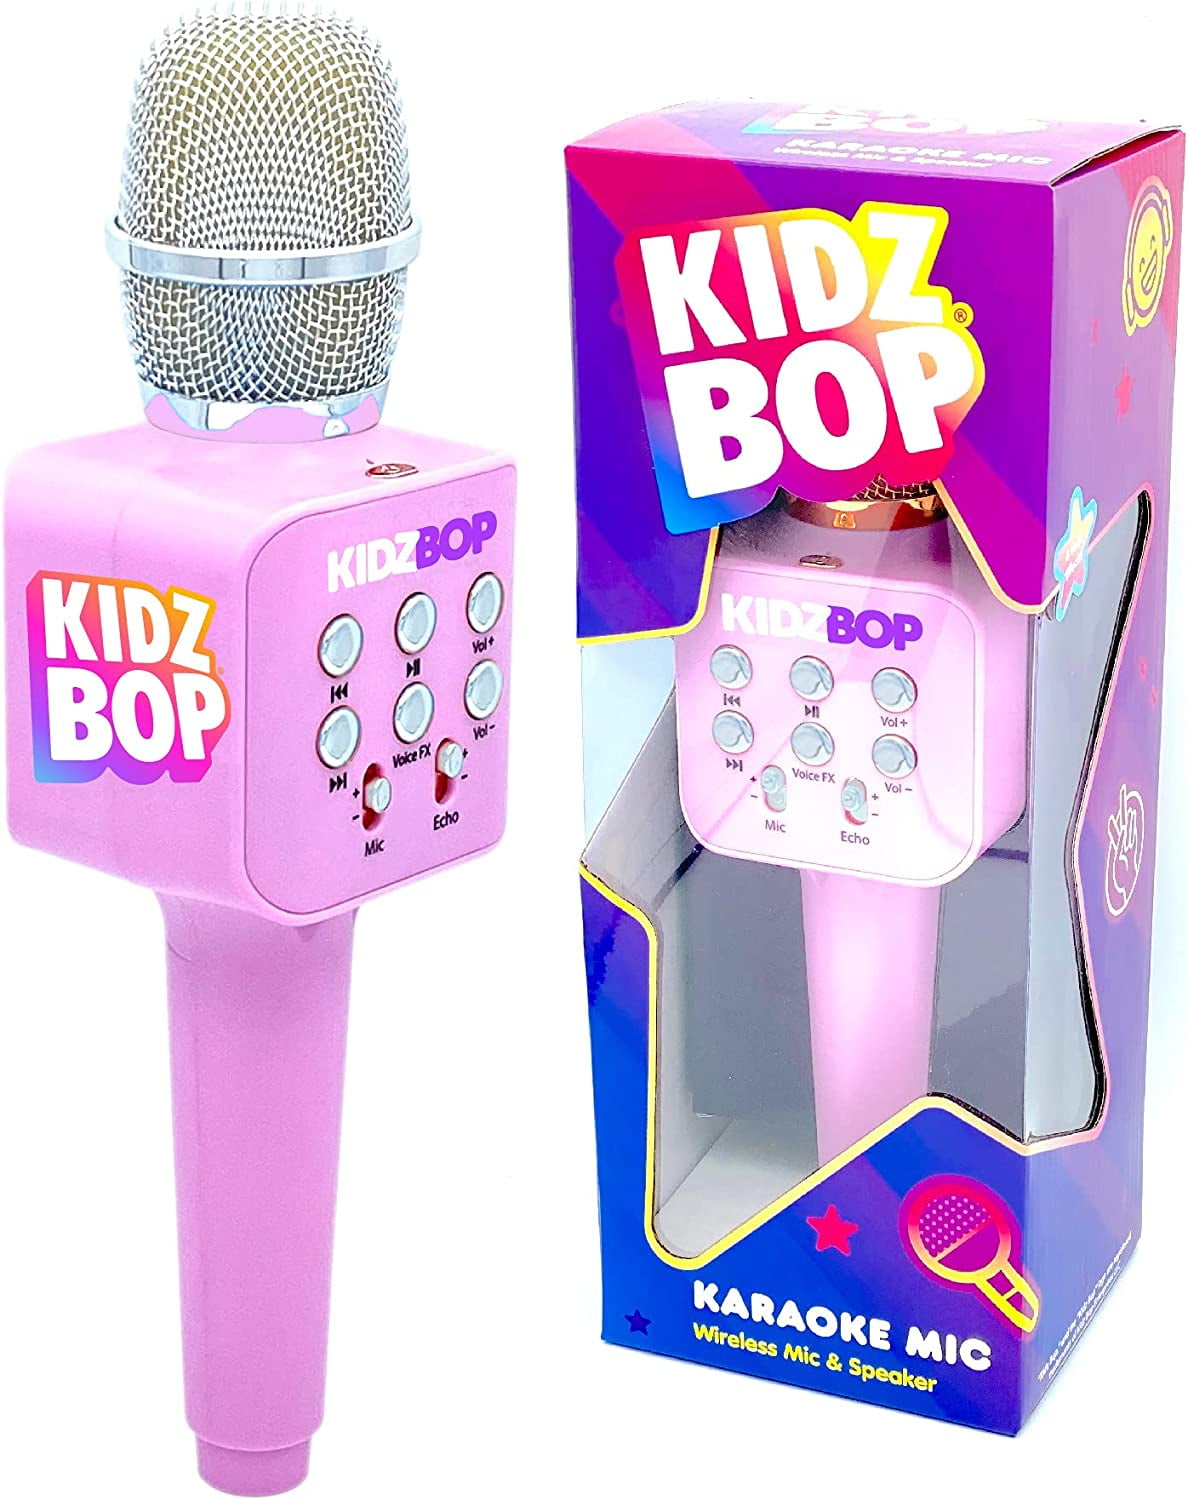 Nathaniel Ward kussen is genoeg Move2Play Kidz Bop Karaoke Microphone Gift, The Hit Music Brand for Kids,  Toy for 4, 5, 6, 7, 8, 9, 10 Year Old Girls and Boys, Pink - Walmart.com